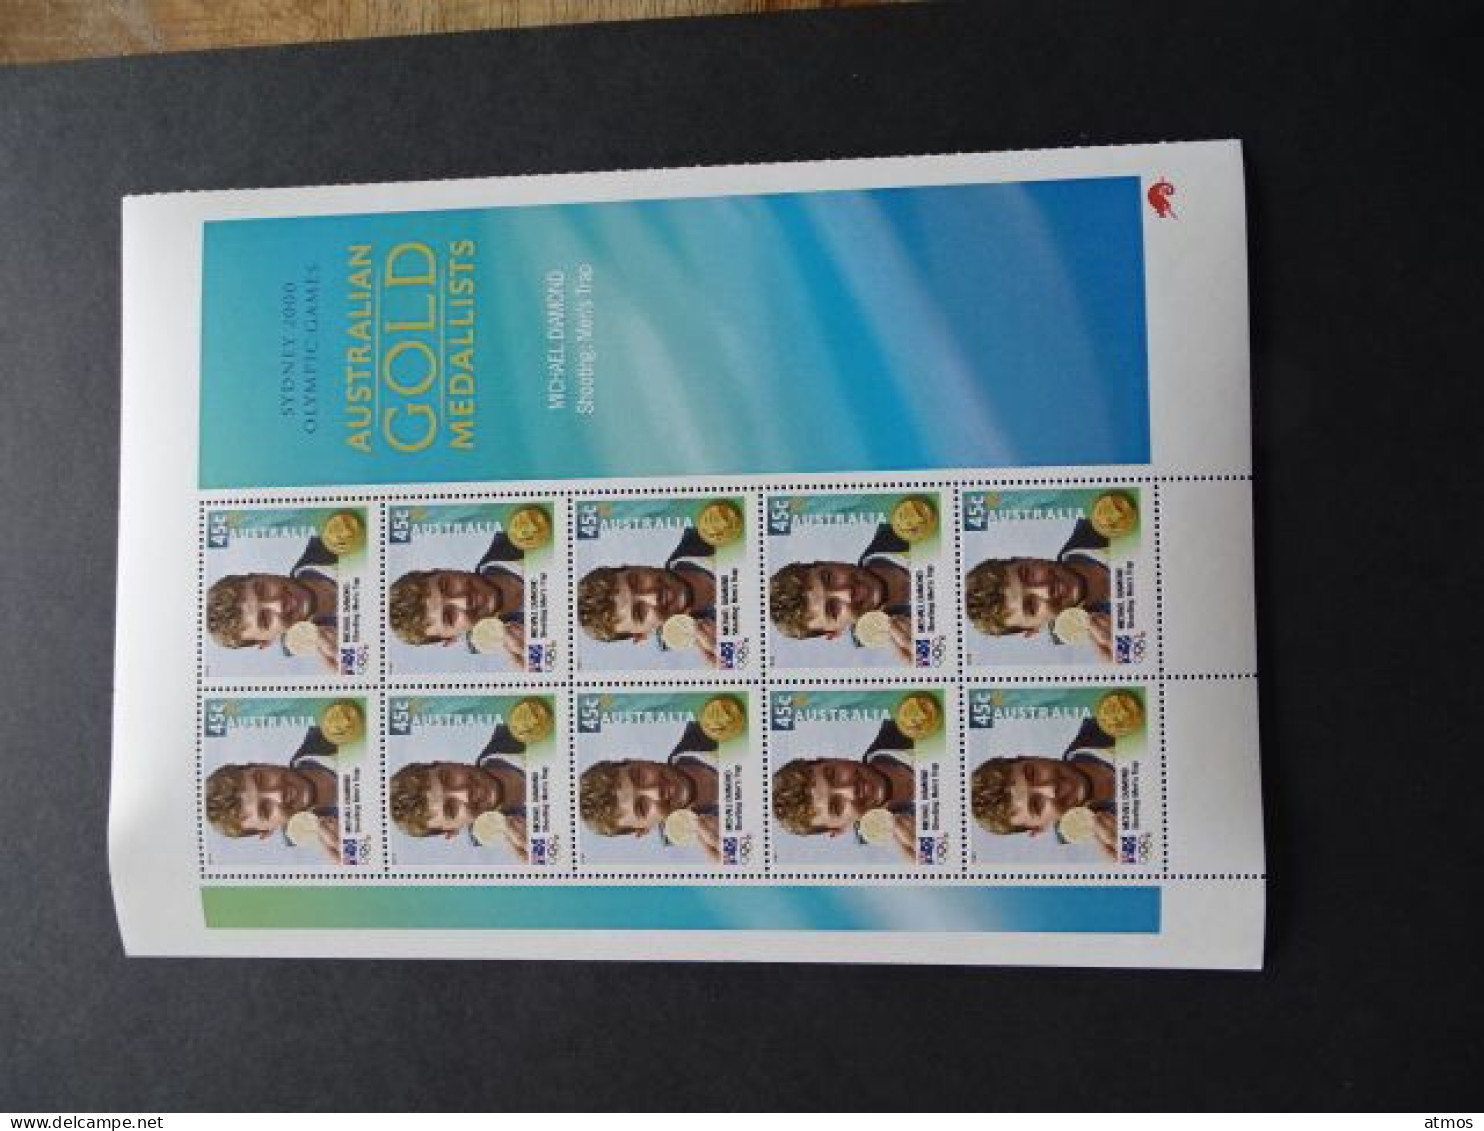 Australia MNH Michel Nr 1975 Sheet Of 10 From 2000 VIC - Mint Stamps